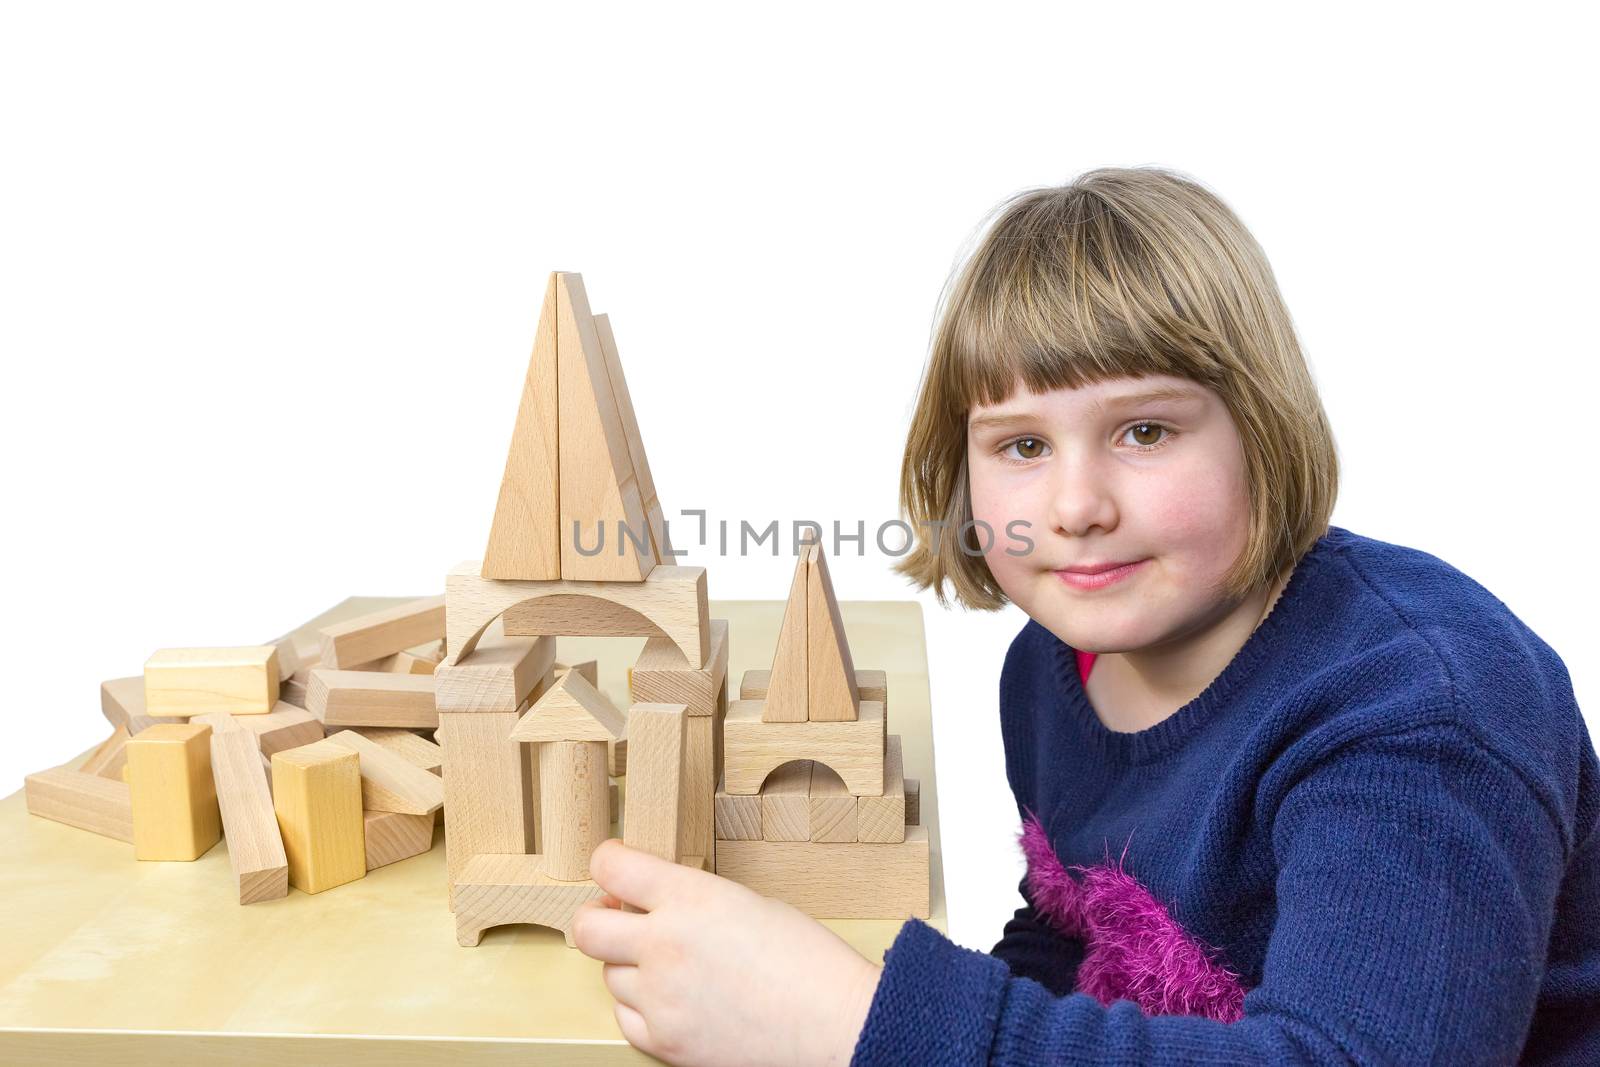 Young dutch girl building construction with wooden blocks isolat by BenSchonewille